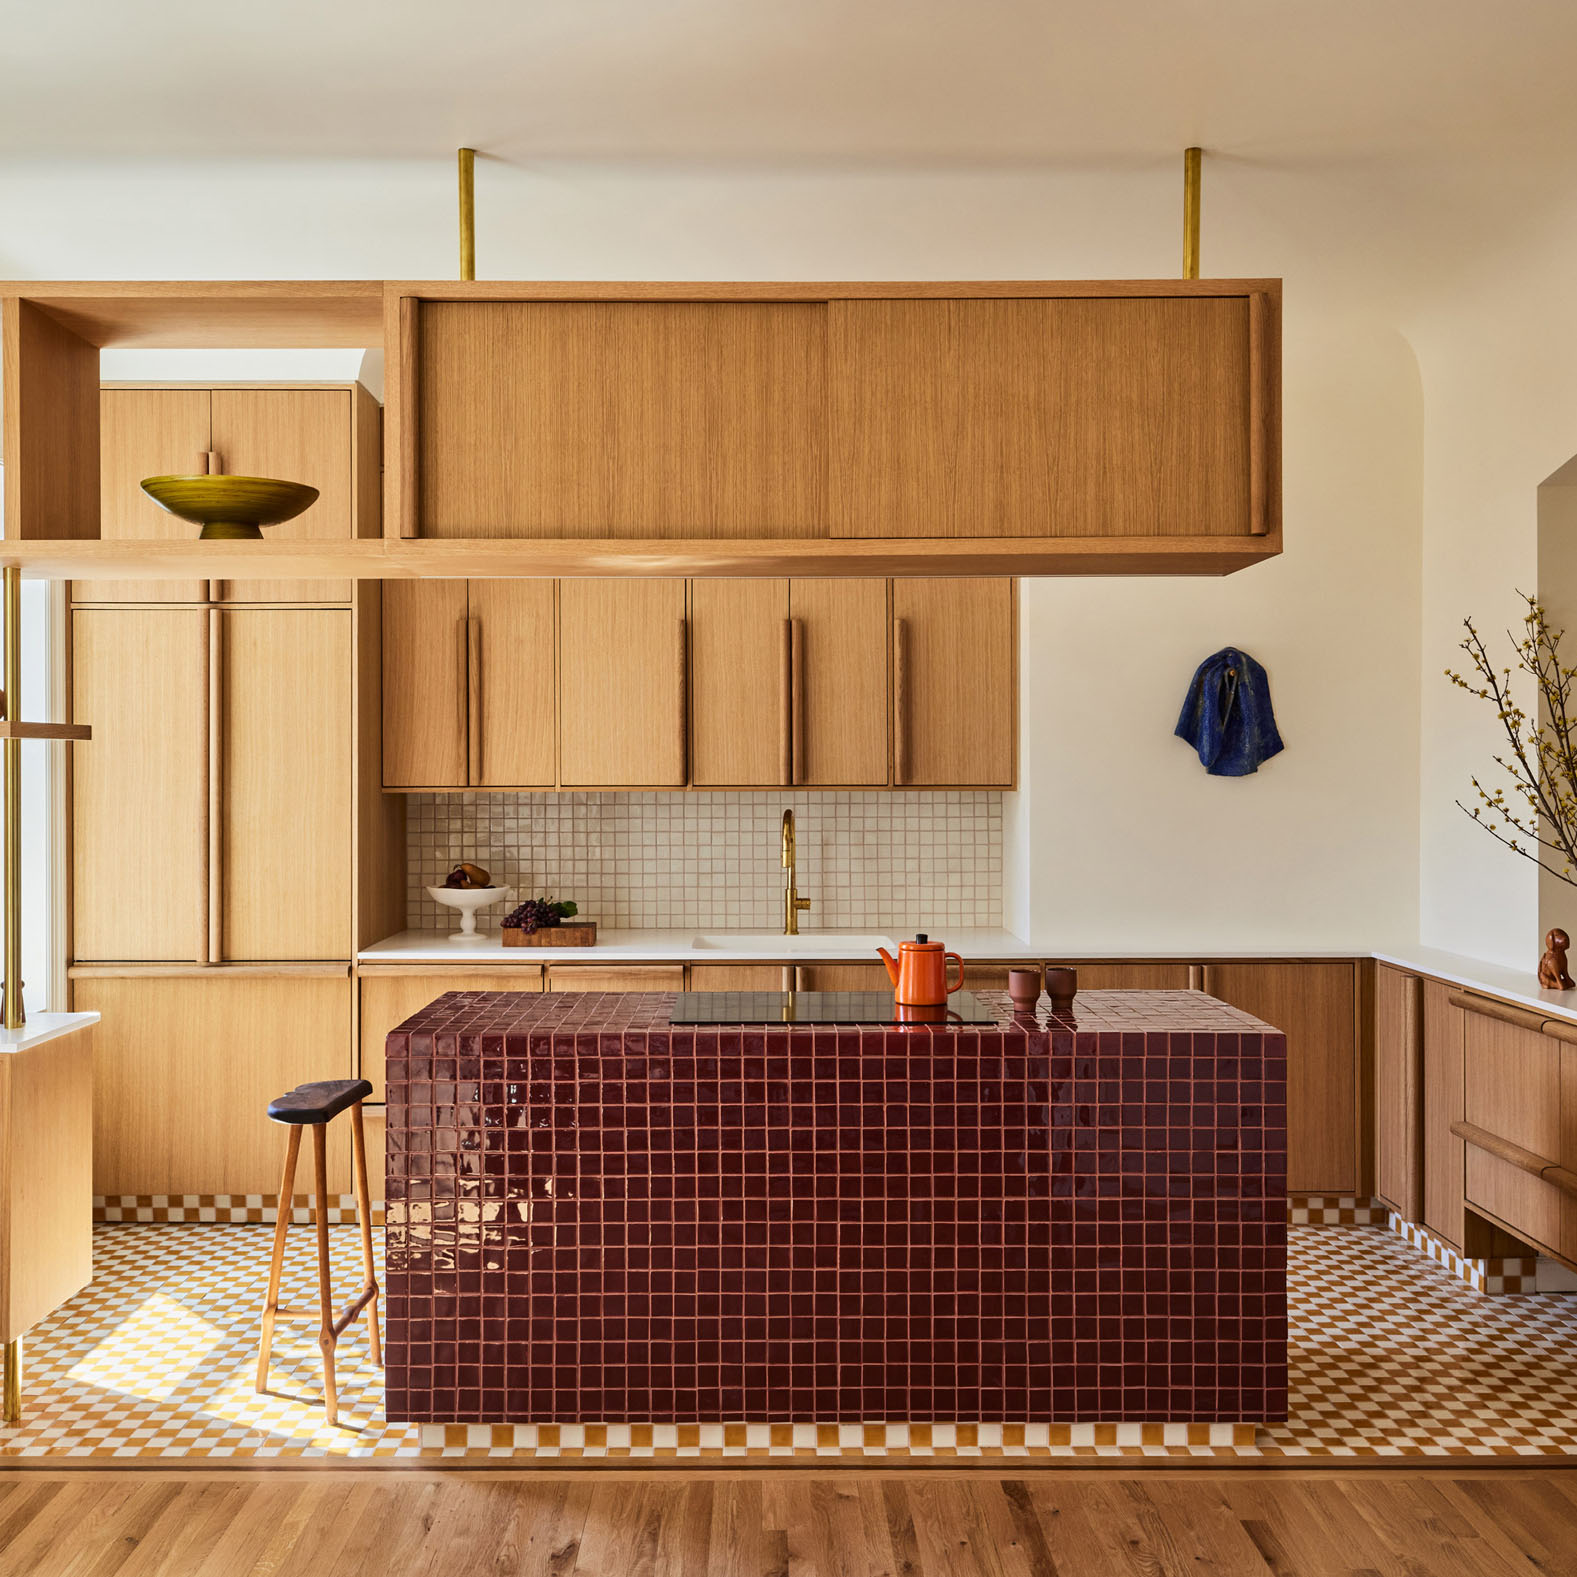 Interior of East Village apartment by GRT Architects